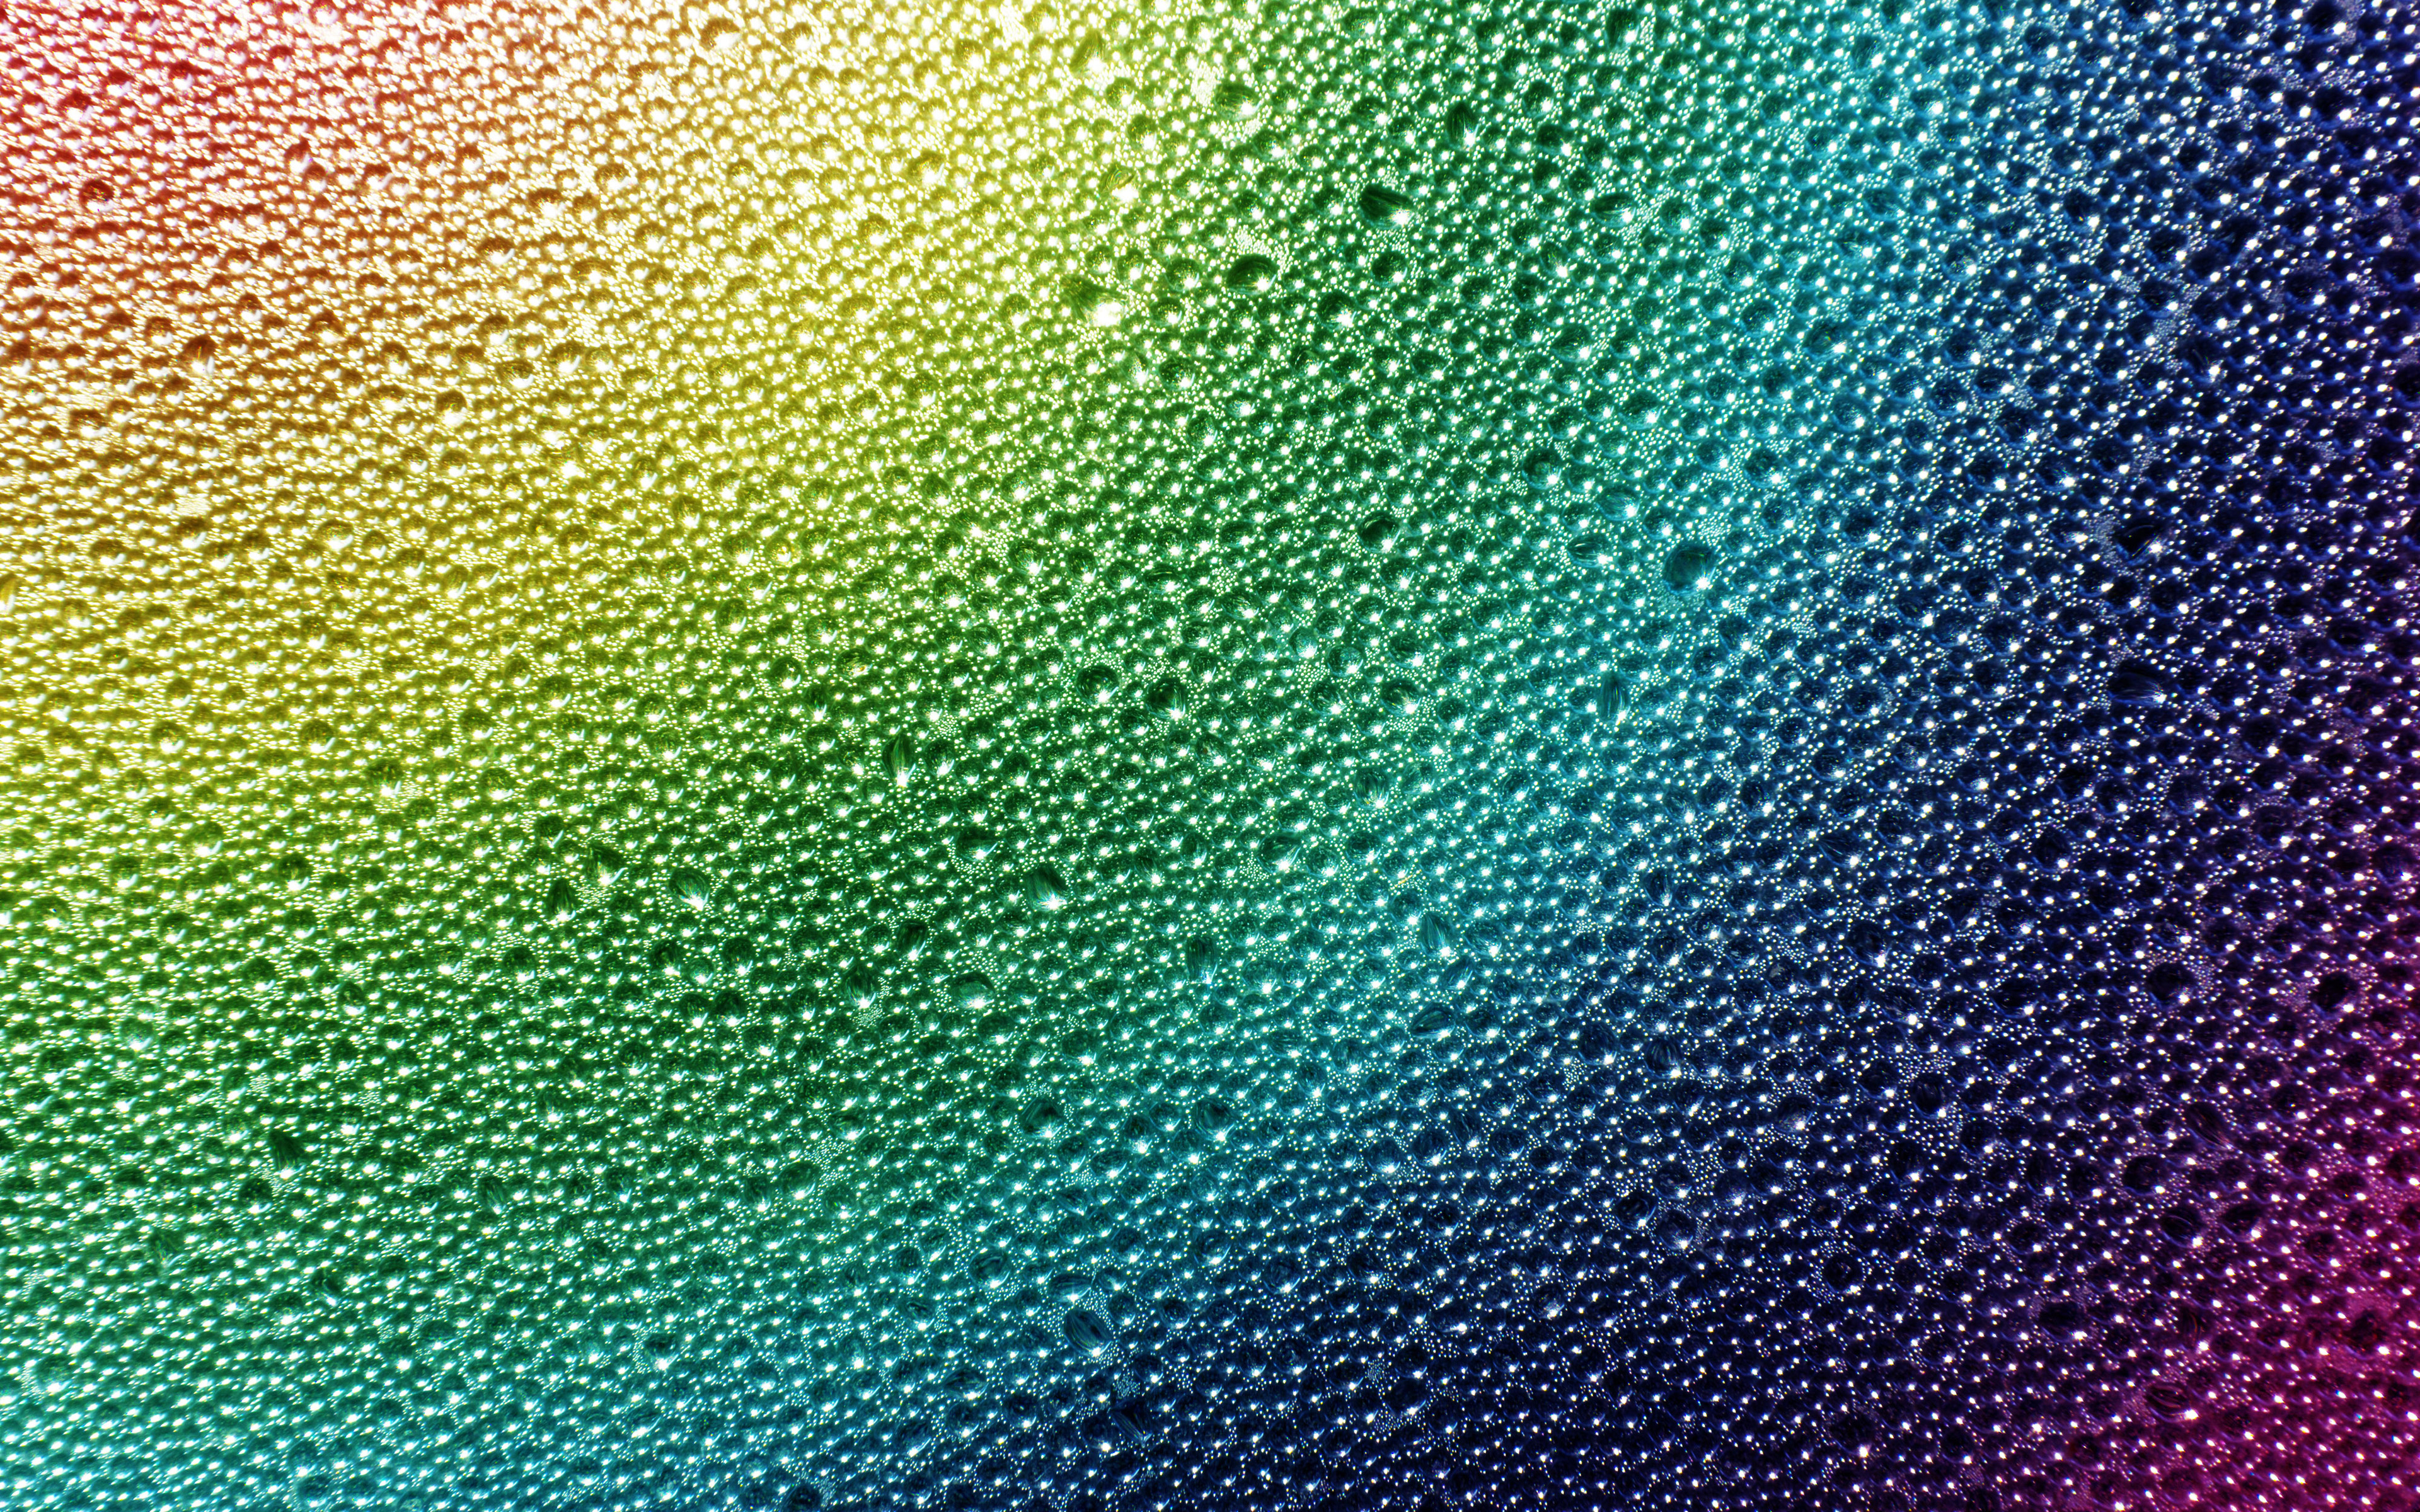 Cool Rainbow Water Wallpapers